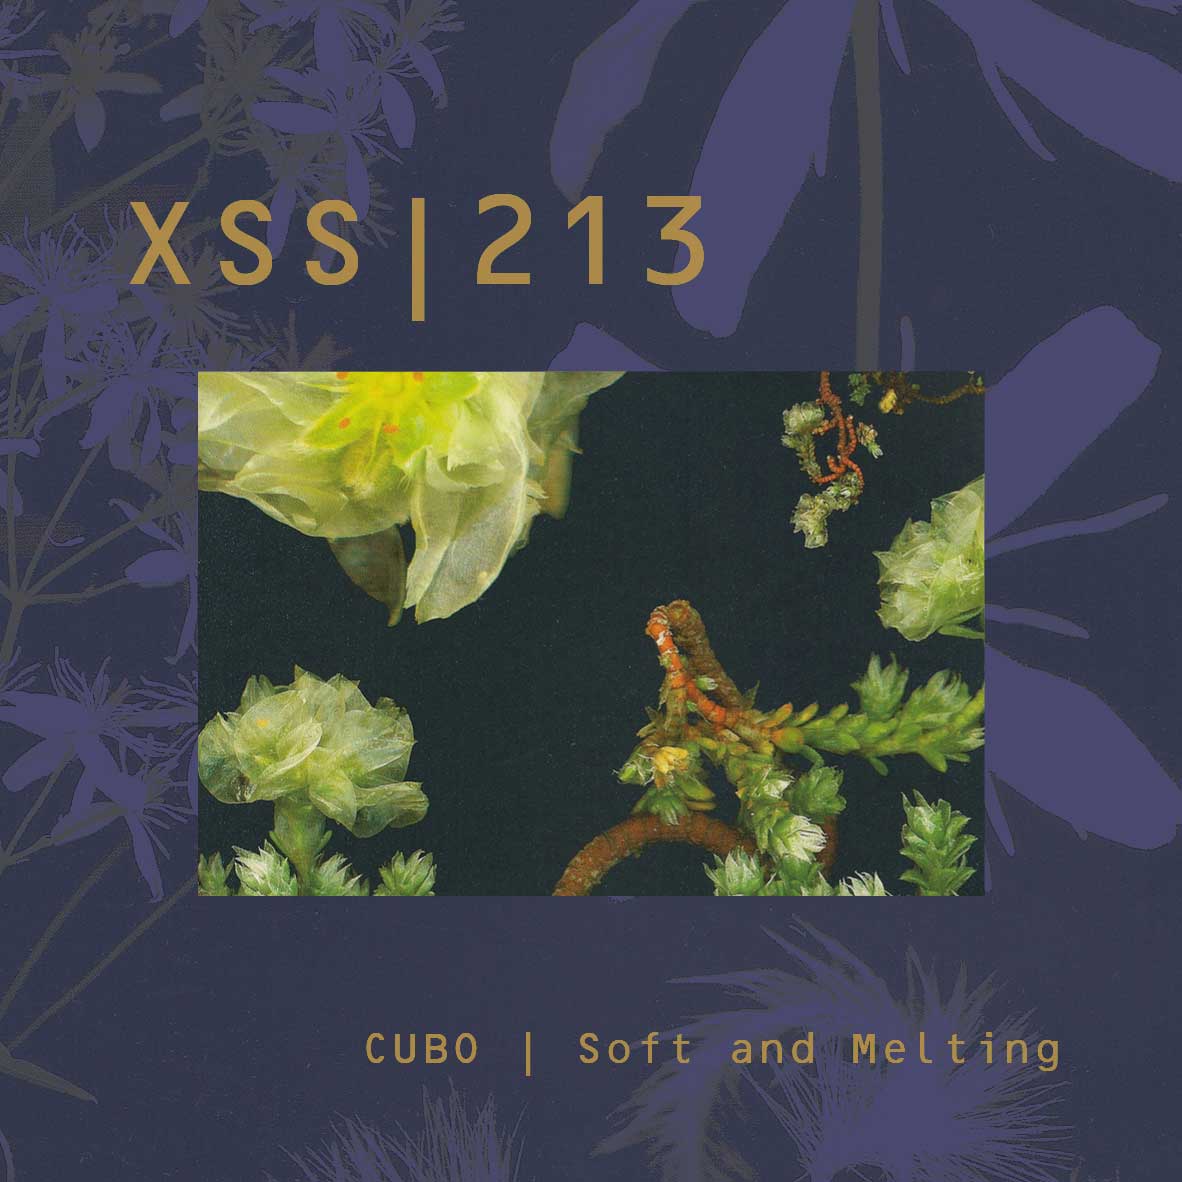 XSS213 | Cubo | Soft and Melting